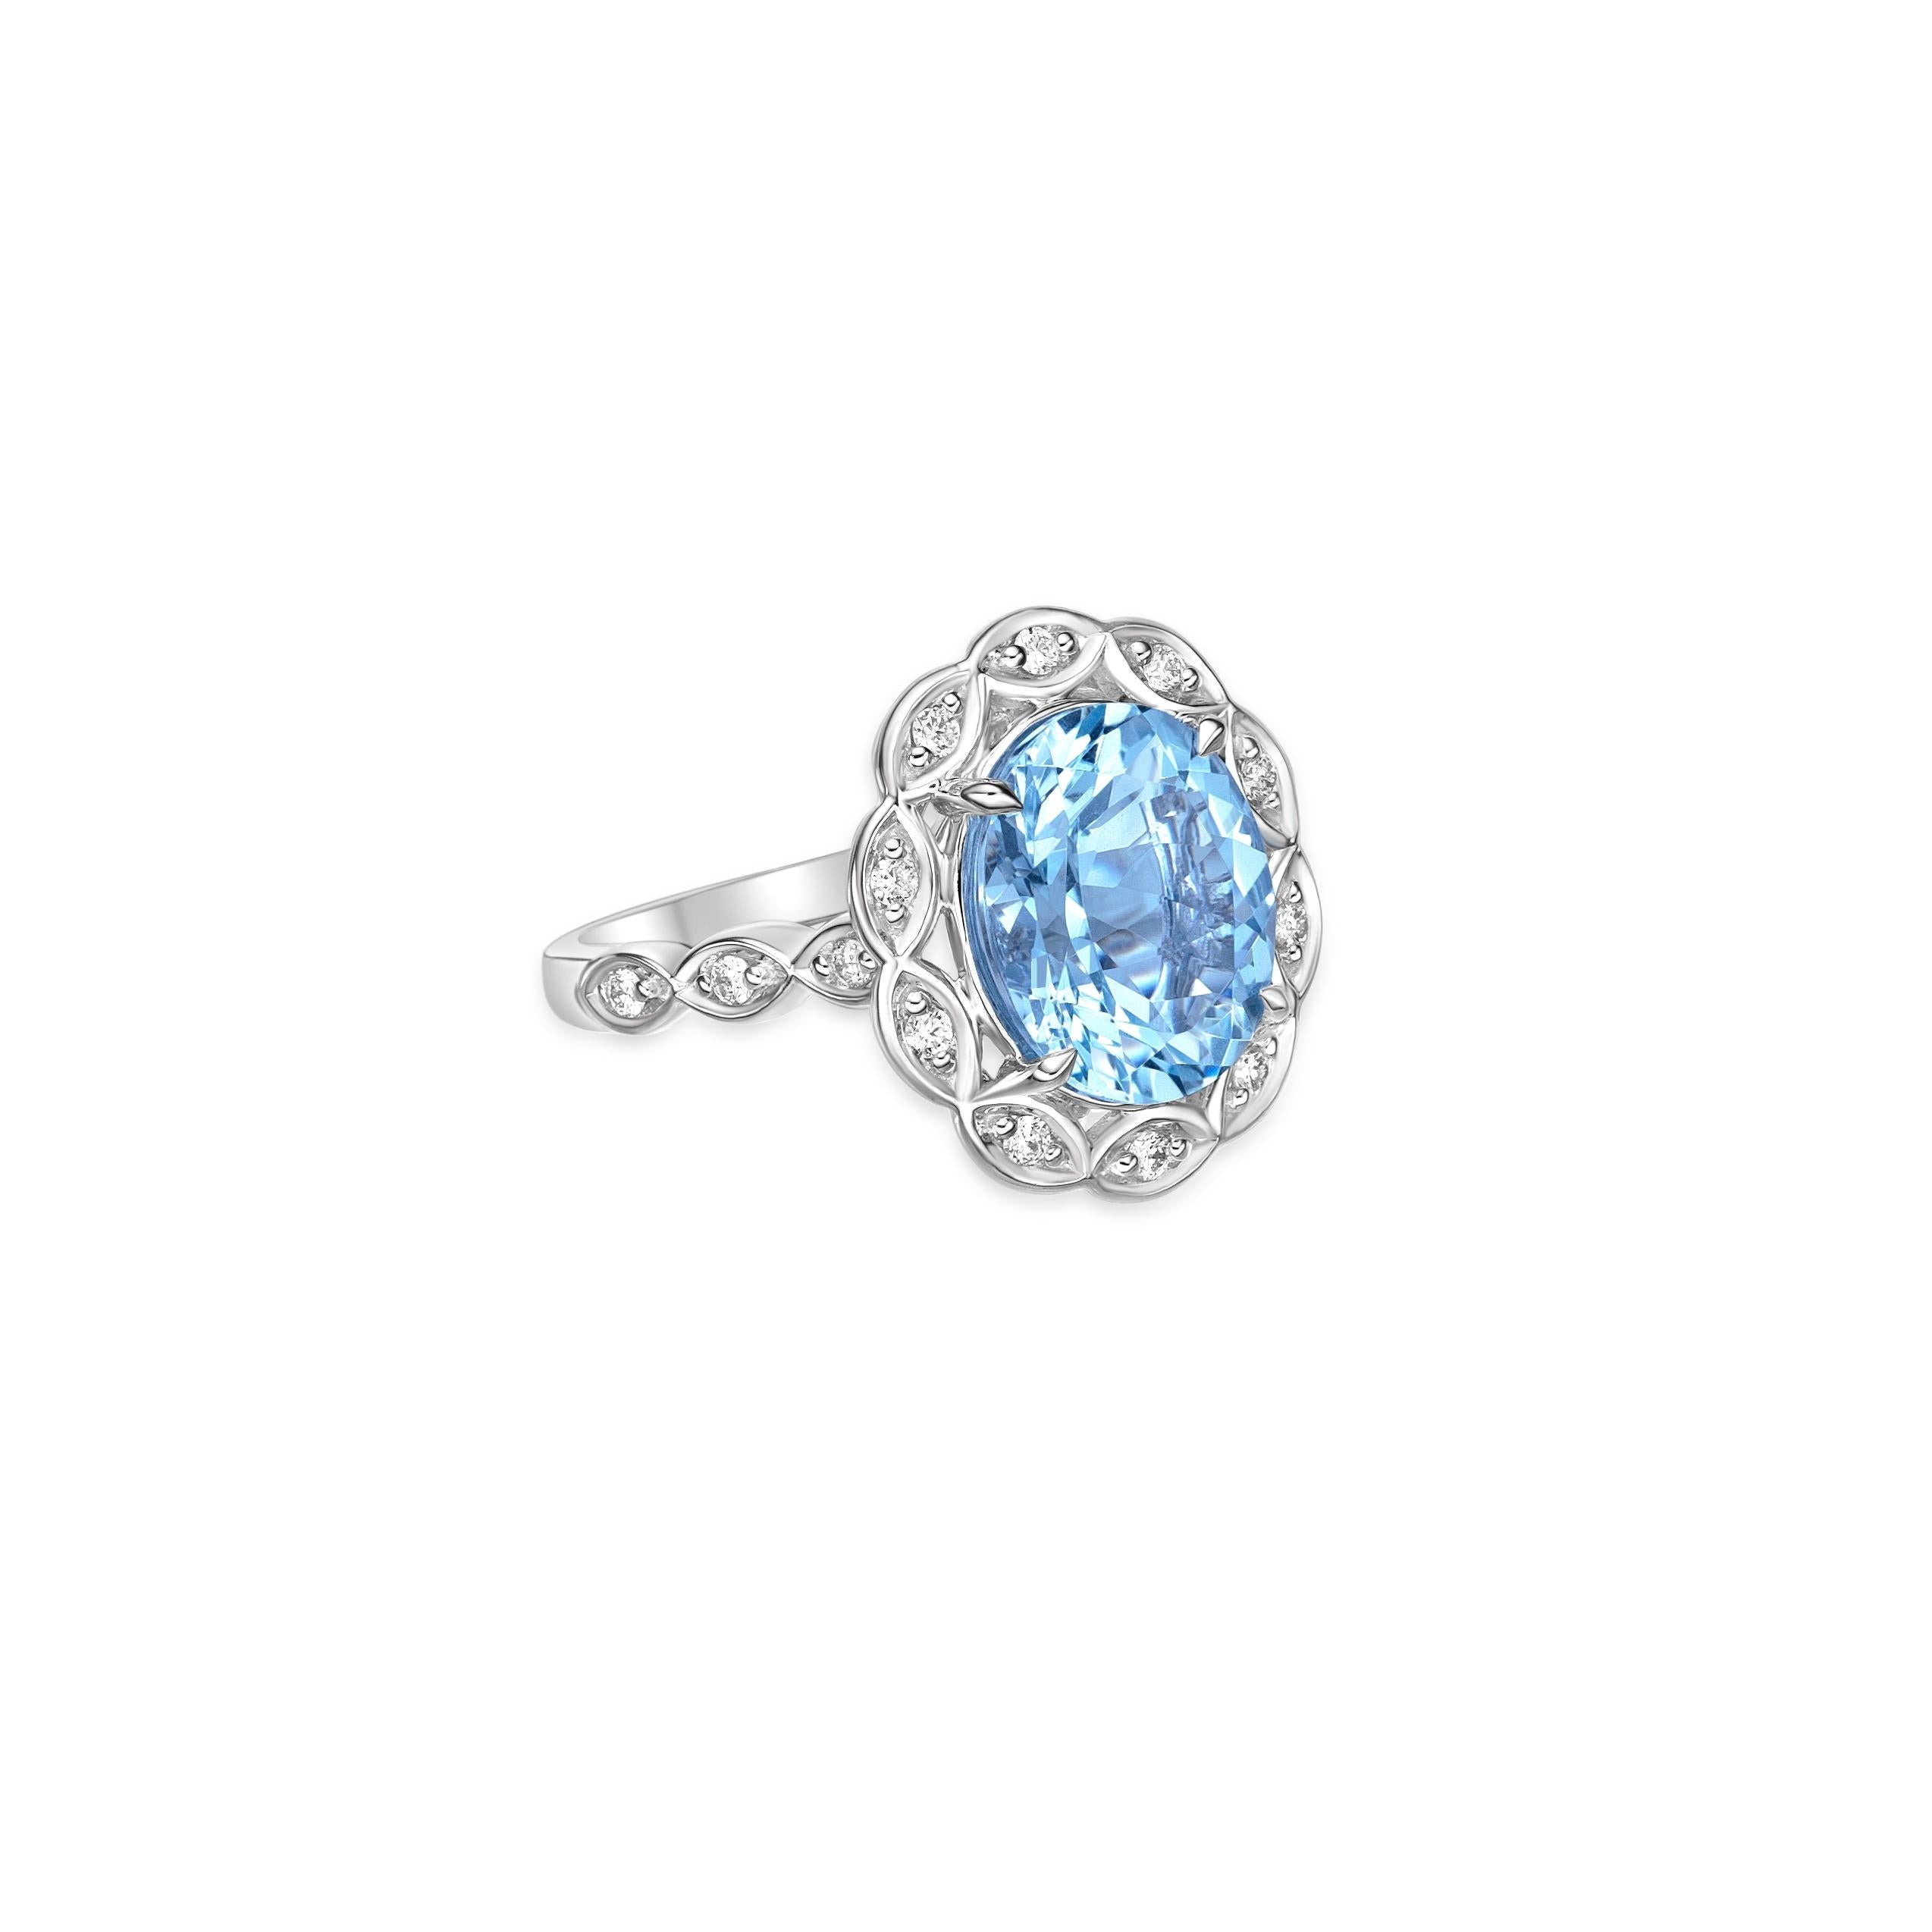 This collection features an array of Aquamarines with an icy blue hue that is as cool as it gets! Accented with Diamonds this ring is made in white gold and present a classic yet elegant look.
  
Aquamarine Fancy Ring in 18Karat White Gold